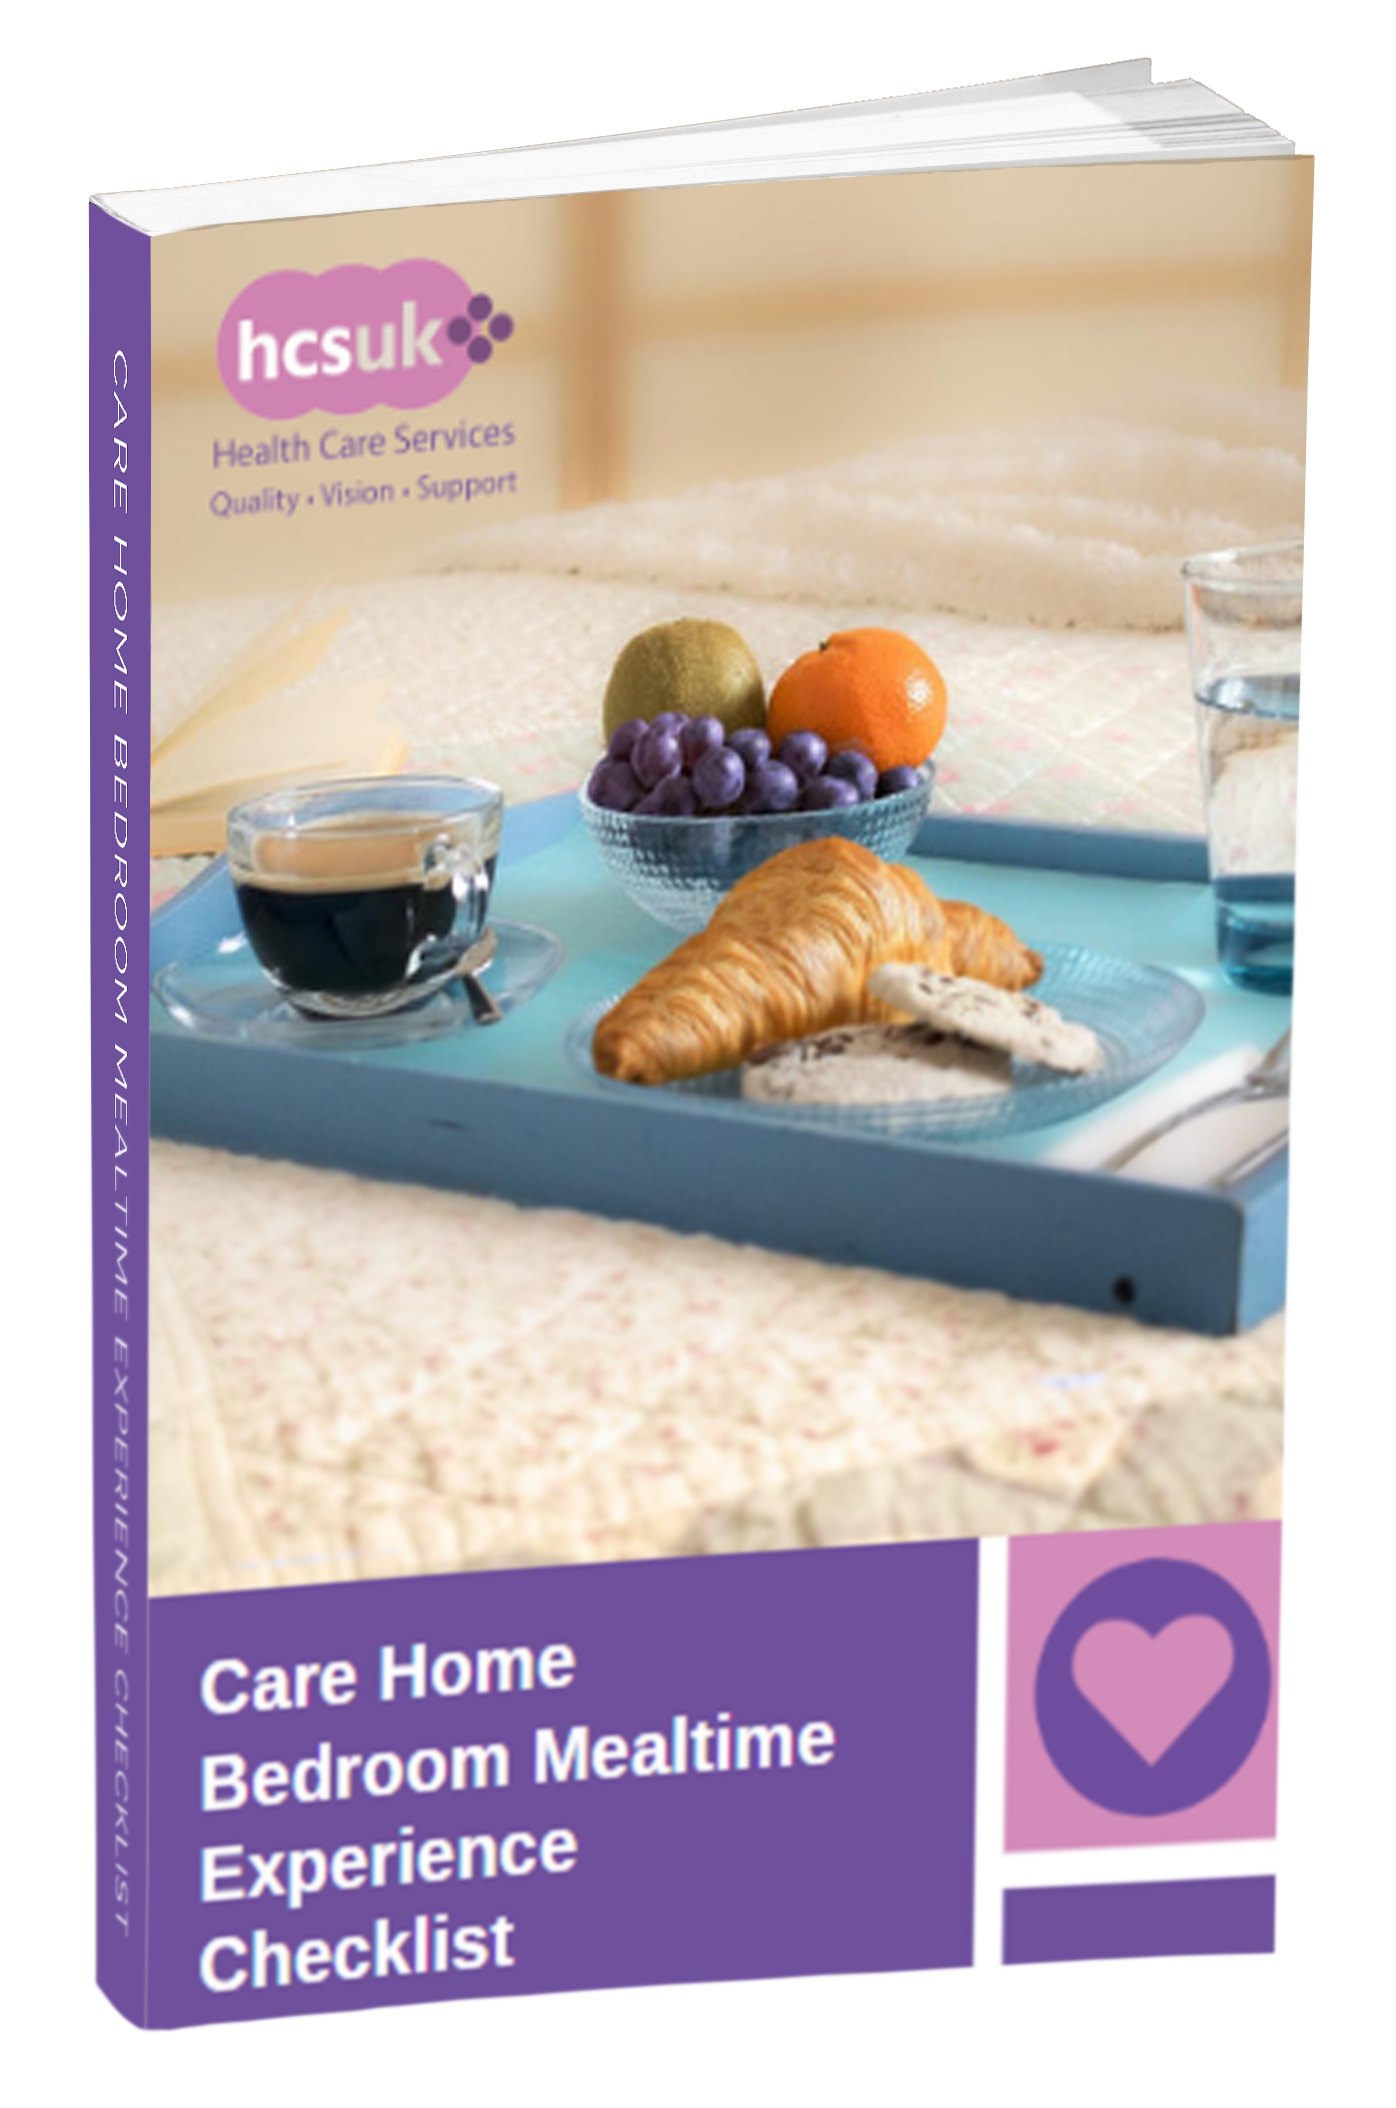 Care-Home-Bedroom-Mealtime-Experience-Checklist